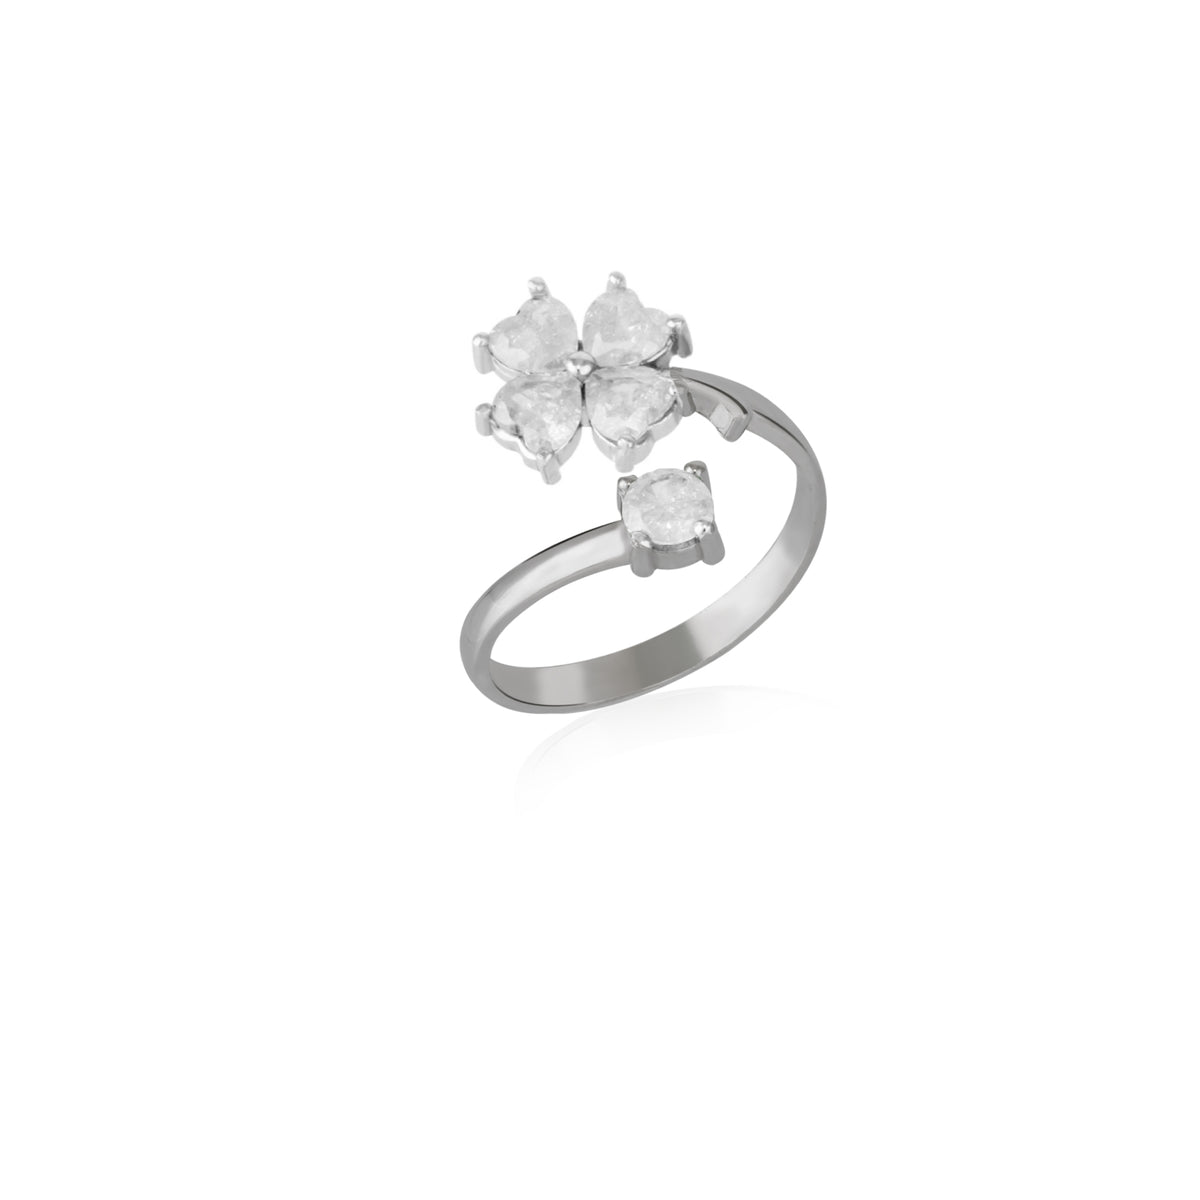 White Four Leaves Clover Luck Ring Sterling Silver